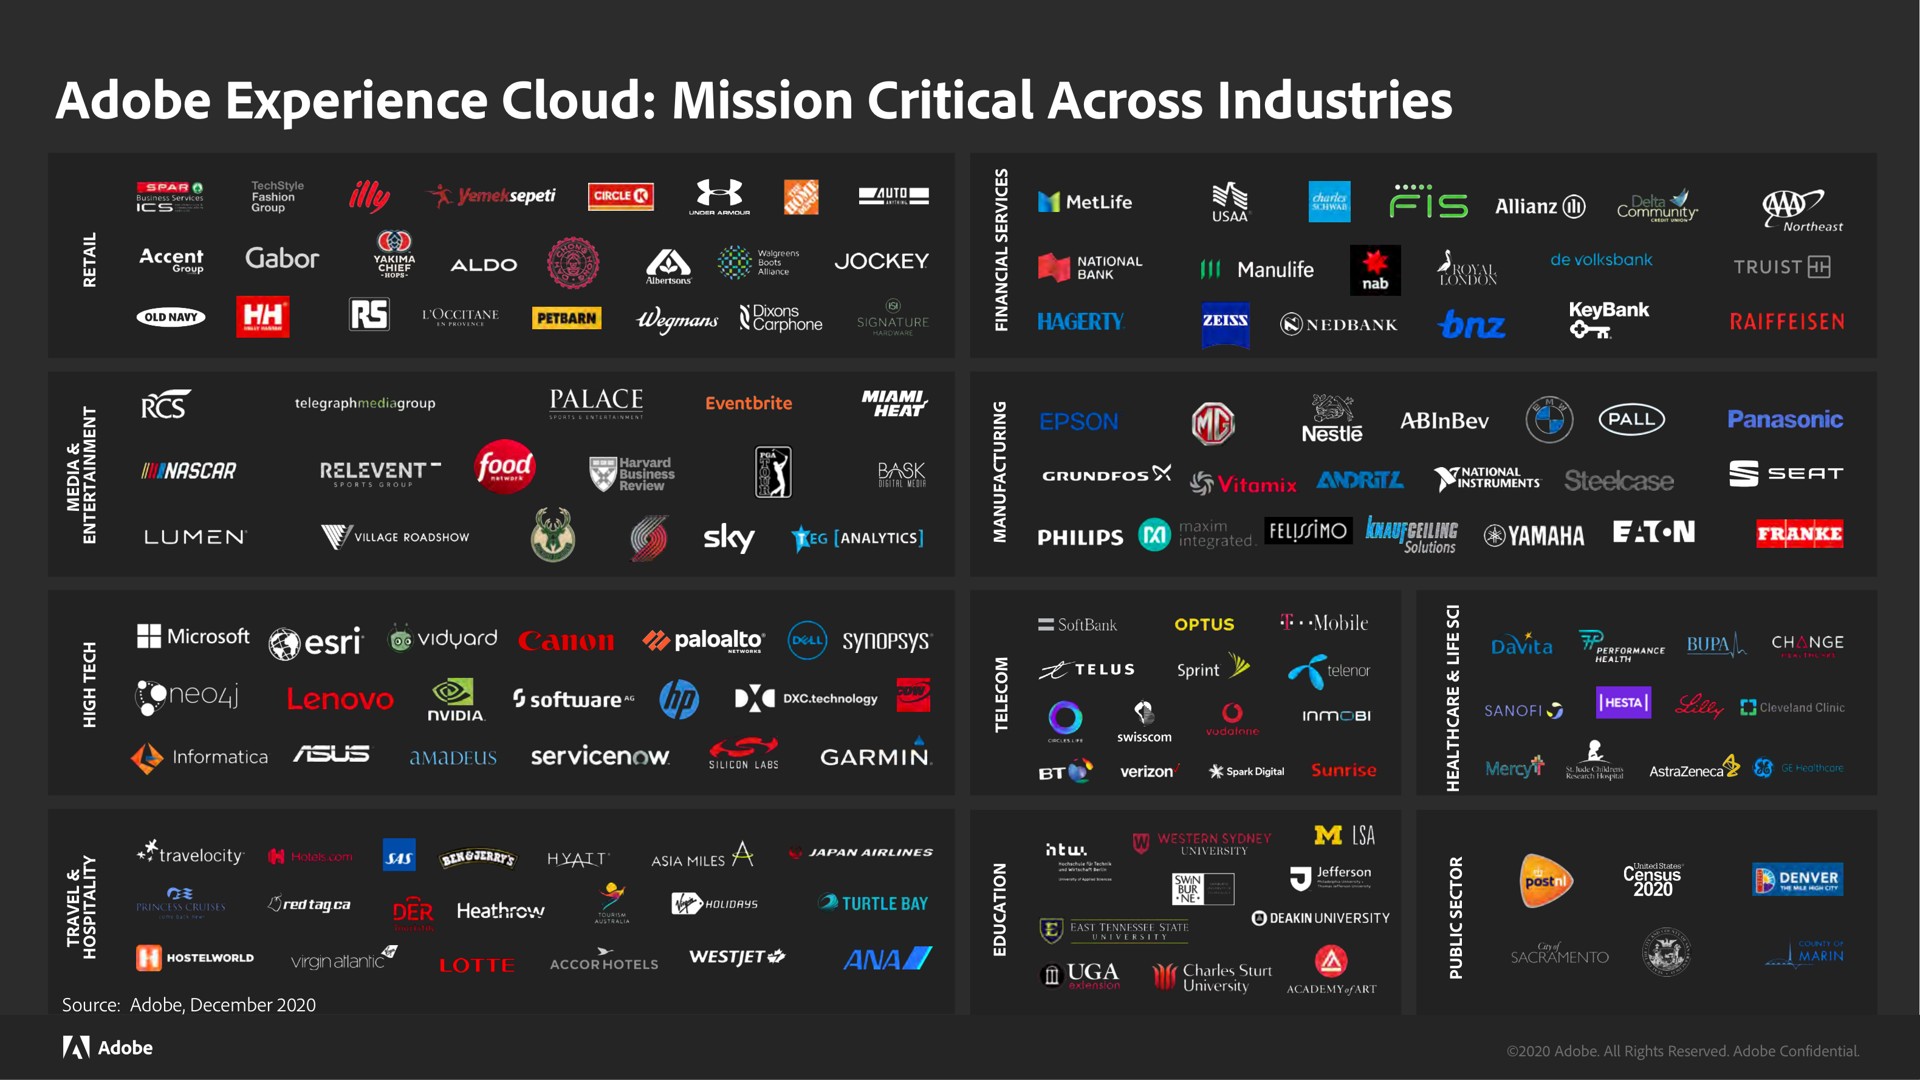 adobe experience cloud mission critical across industries | Adobe